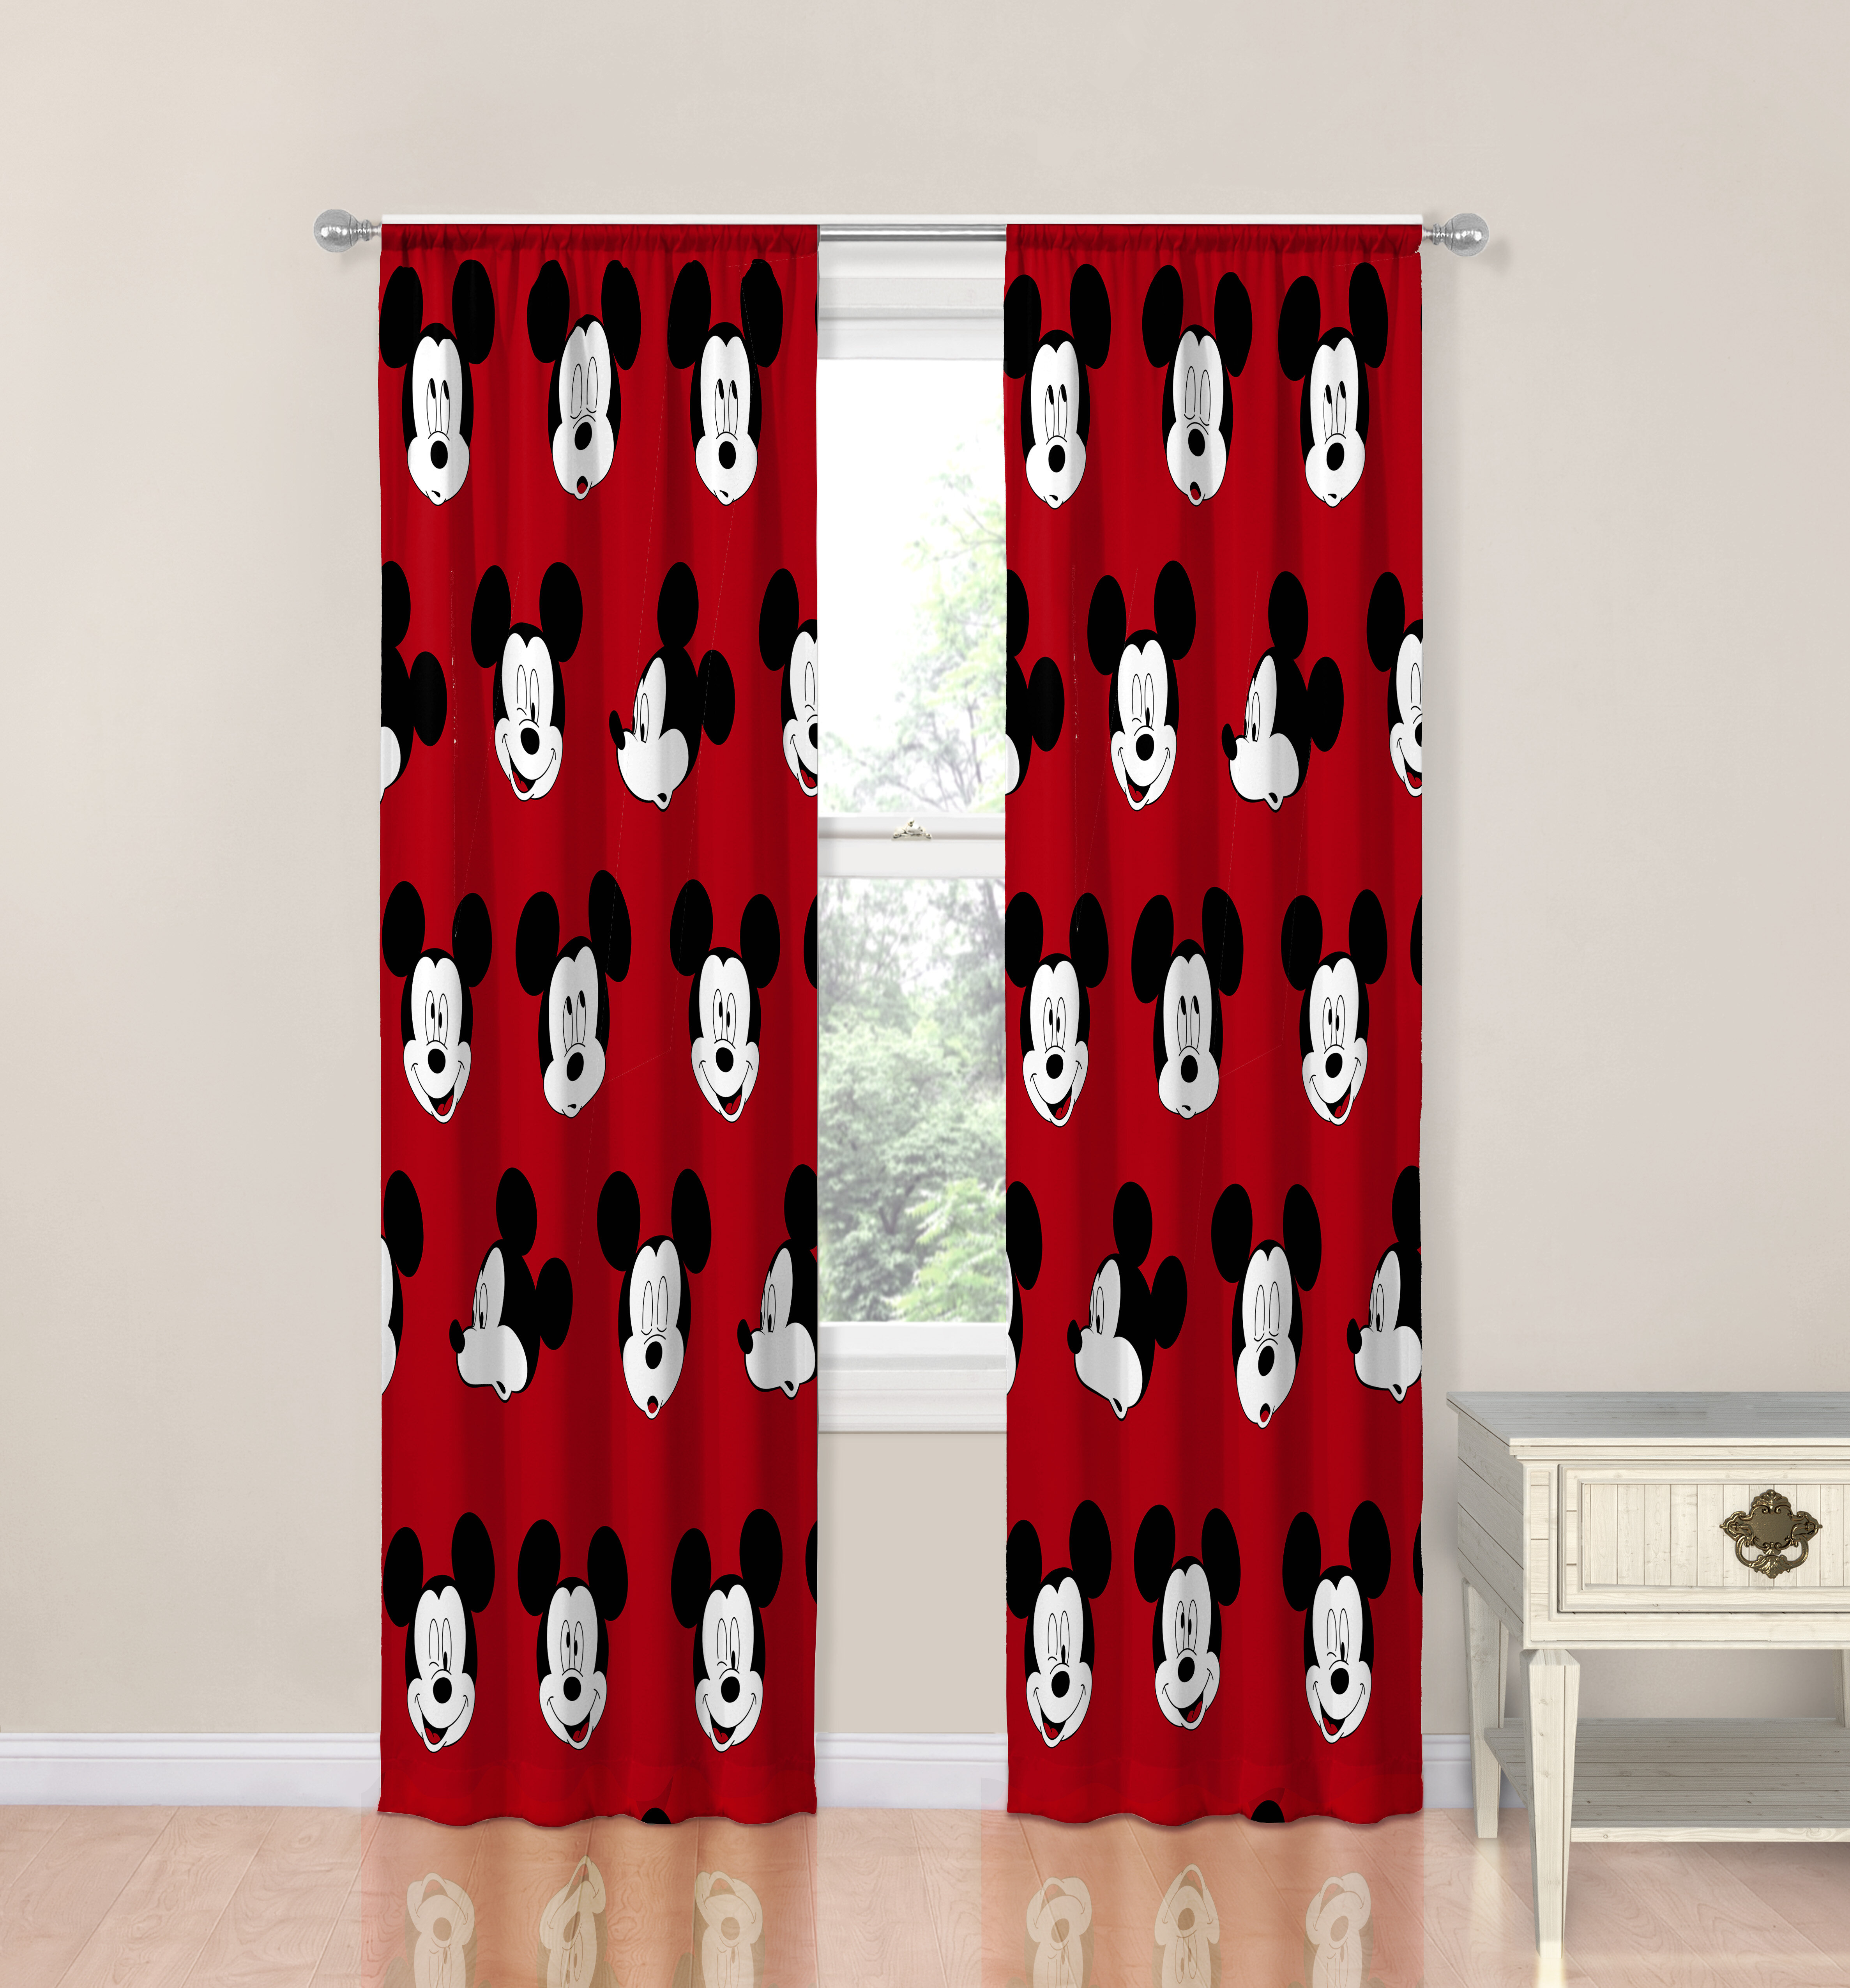 Outstanding mickey valance Mickey Mouse Valance Handcrafted Curtain Custom Sewn From Yellow Black Red Fabric New Curtains Window Treatments Home Living Ninebot Ro